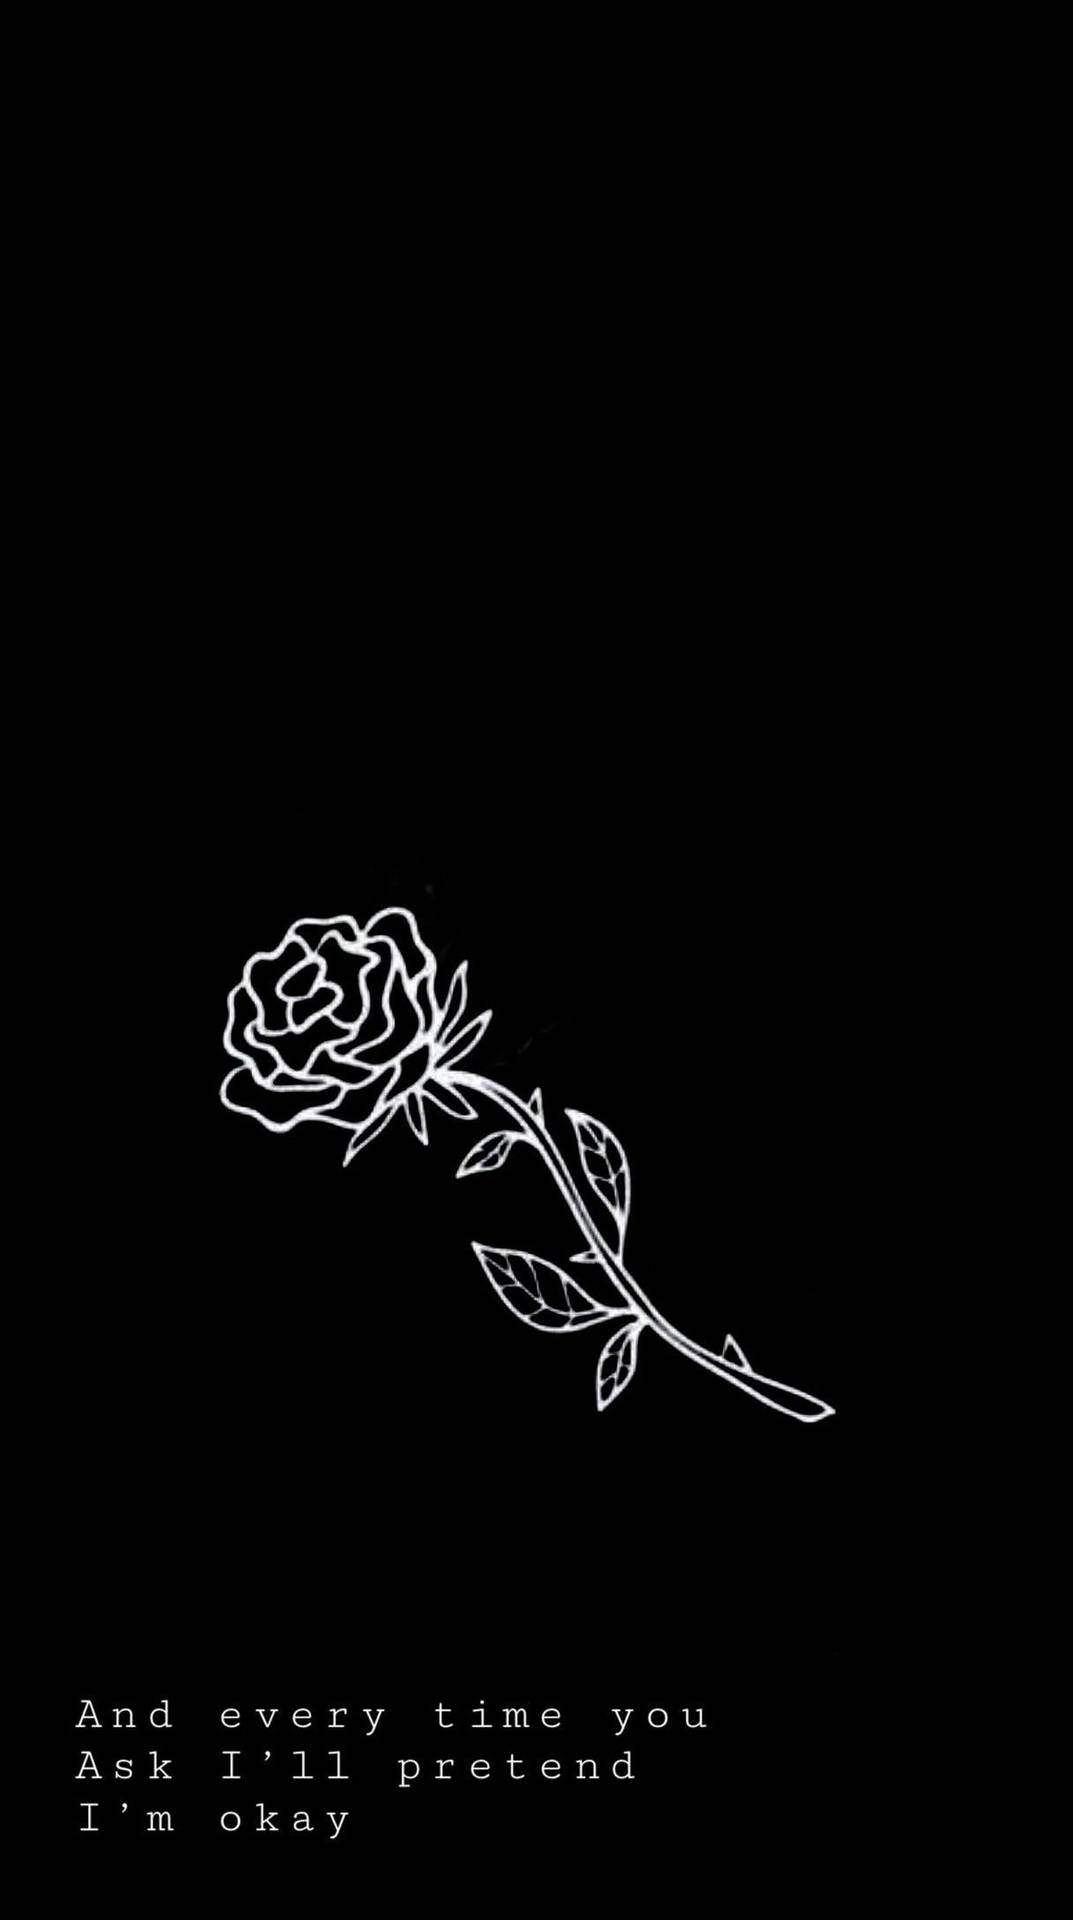 Okay Quote With Rose Illustration Wallpaper